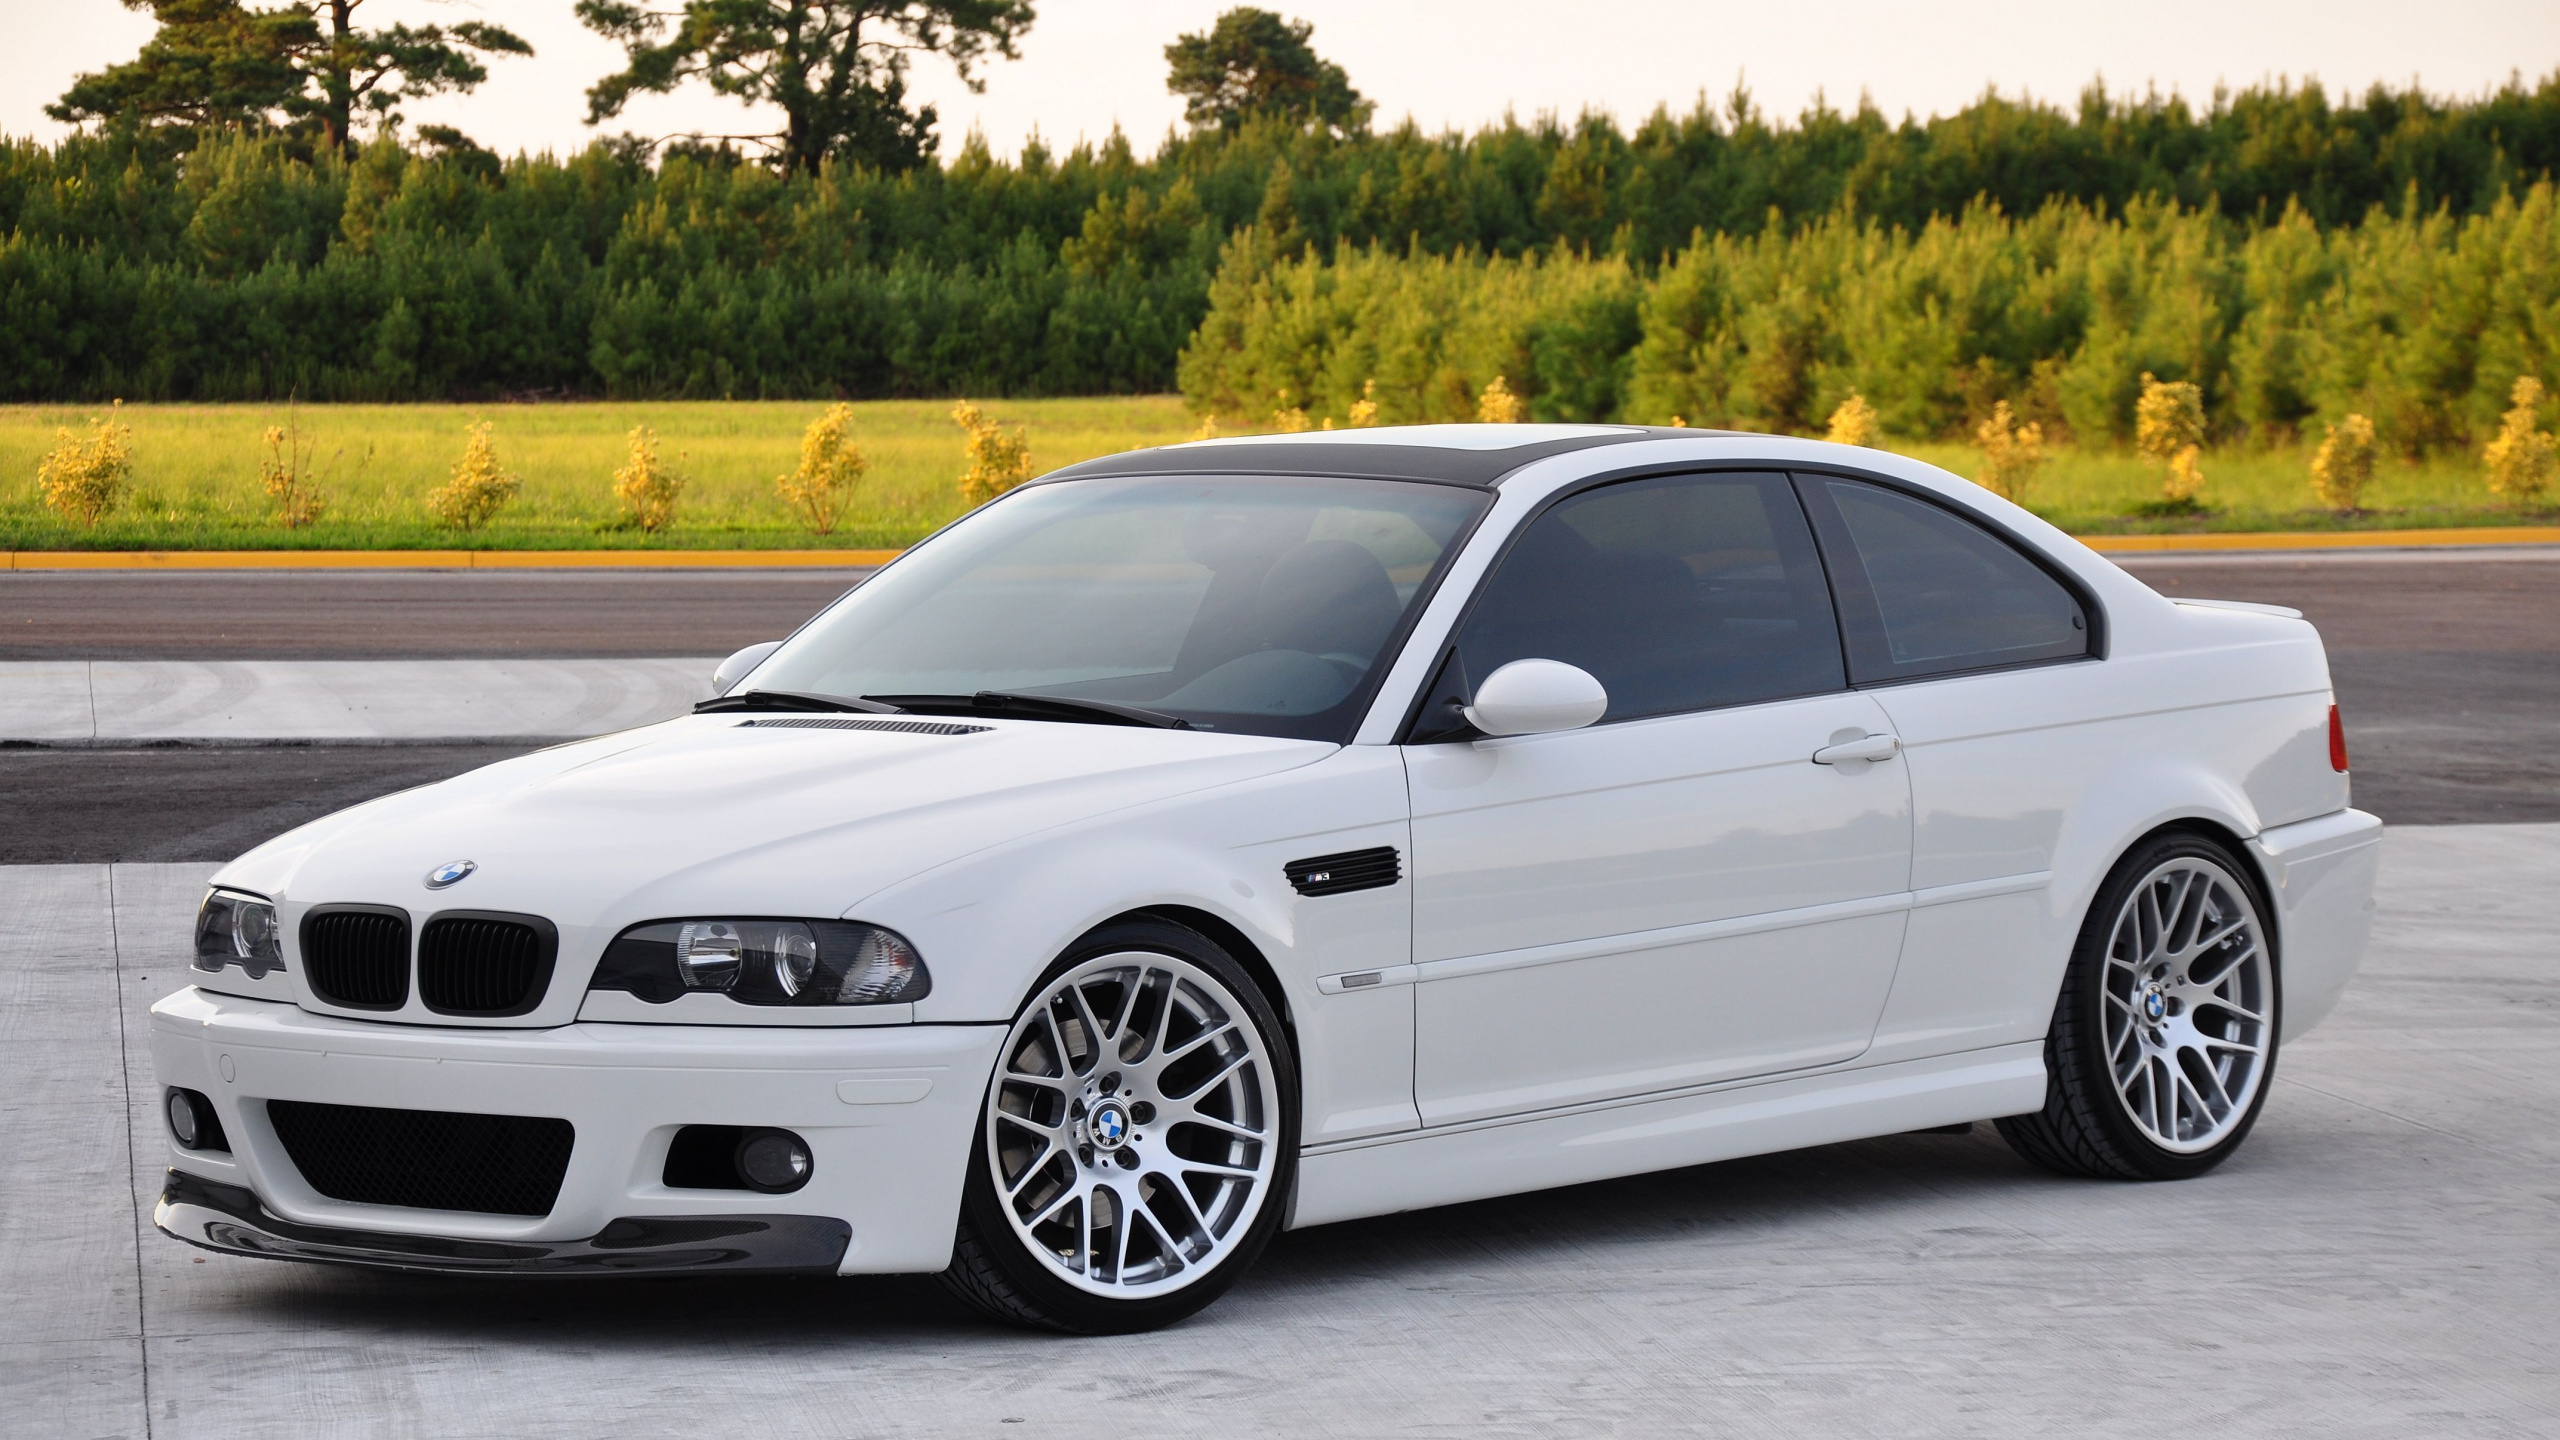 White Bmw m 3 Coupe on Road During Daytime. Wallpaper in 2560x1440 Resolution